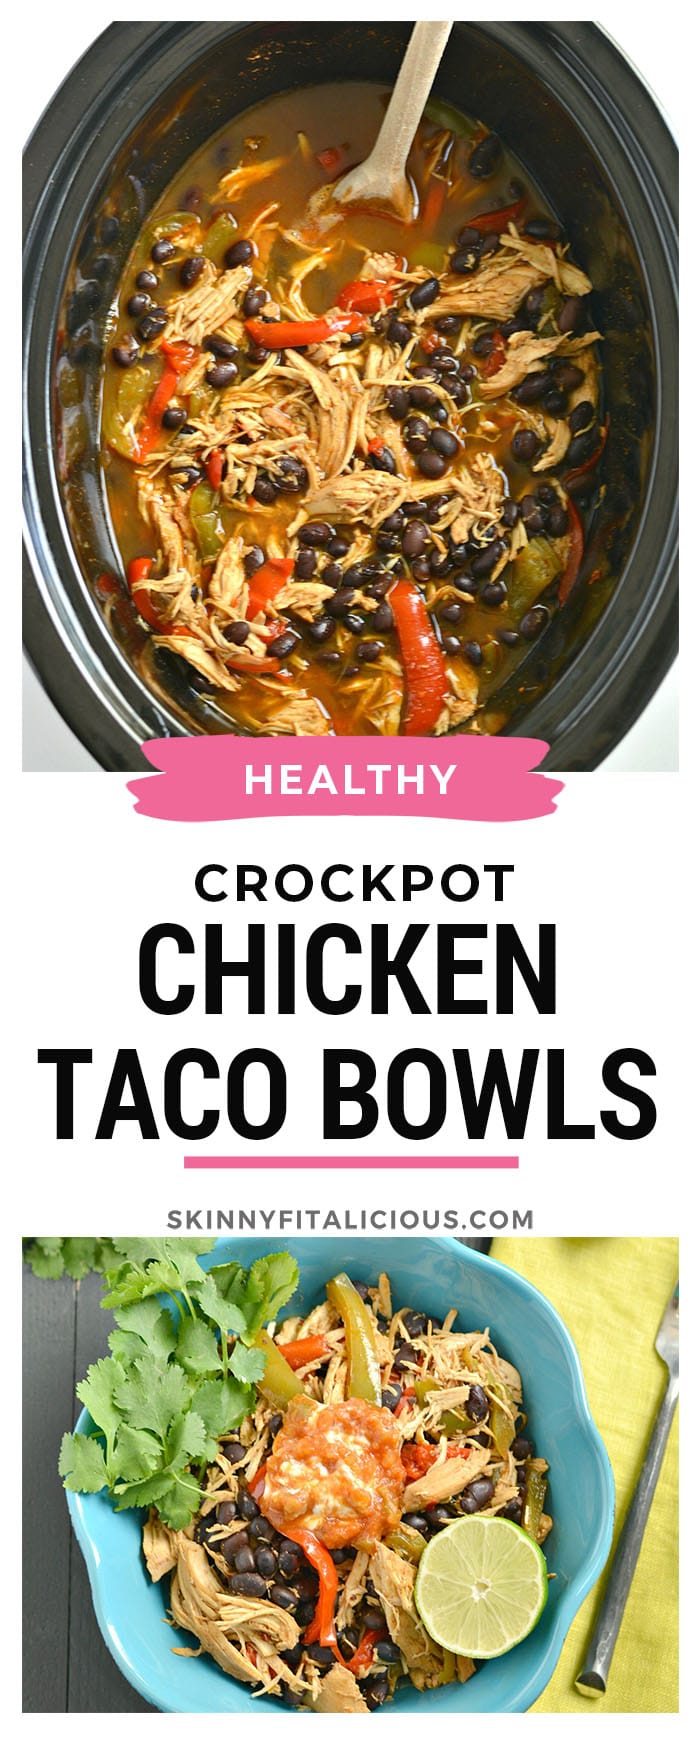 Make taco night easy night with these Crockpot Chicken Taco Bowls! Made naturally gluten free with homemade low sodium taco seasoning and layered with fresh vegetables, this low calorie dinner is one everyone will love especially the cook! Gluten Free + Low Calorie